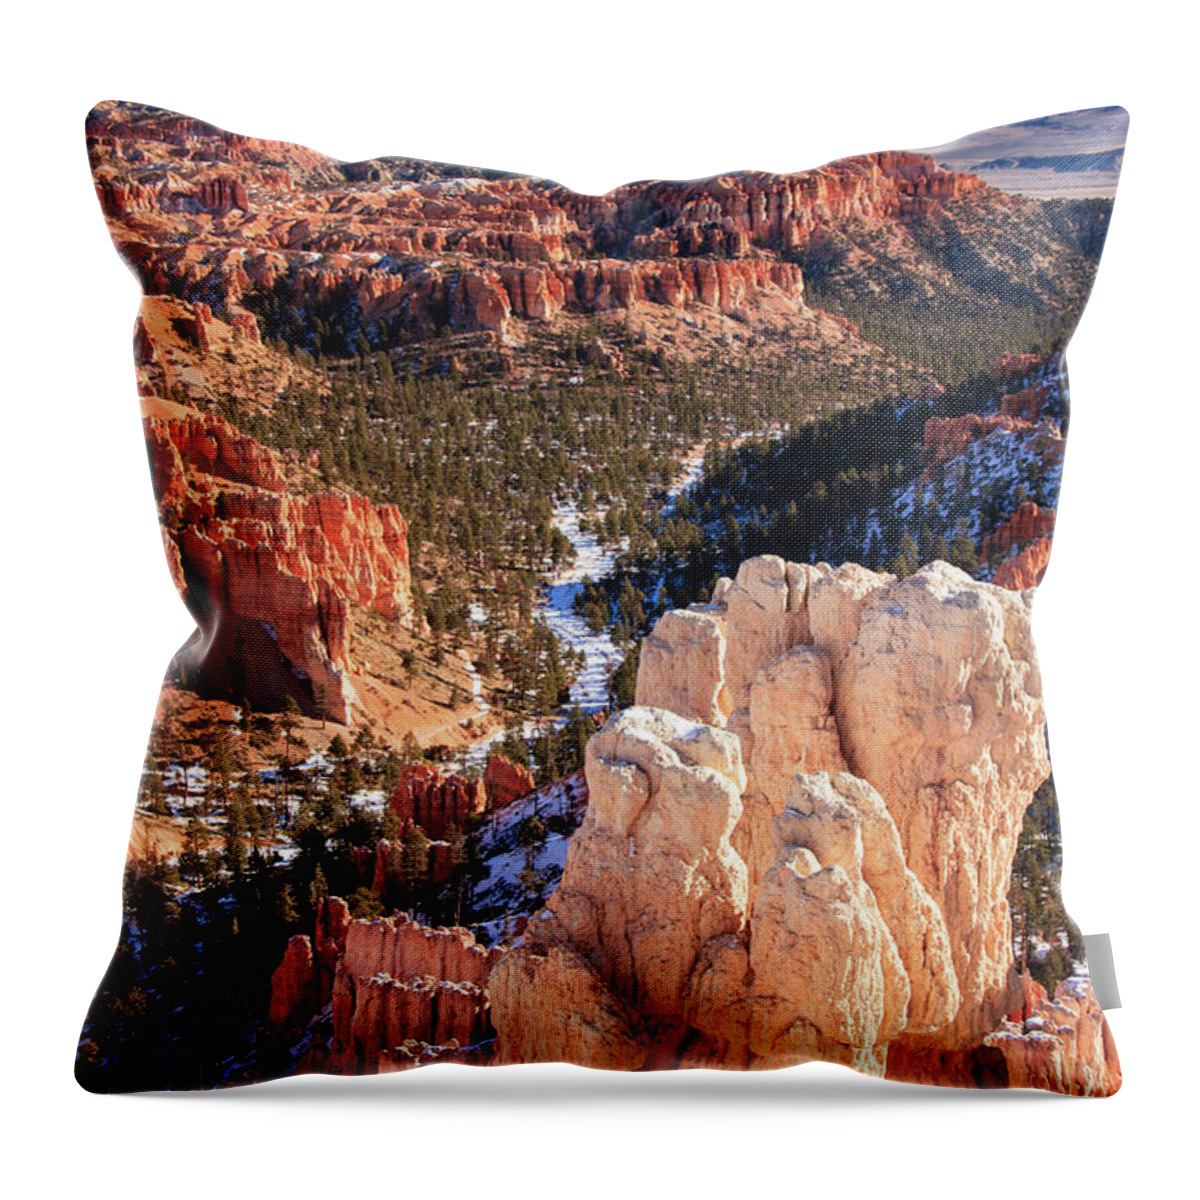 Tranquility Throw Pillow featuring the photograph Inspirational by Daniel Cummins